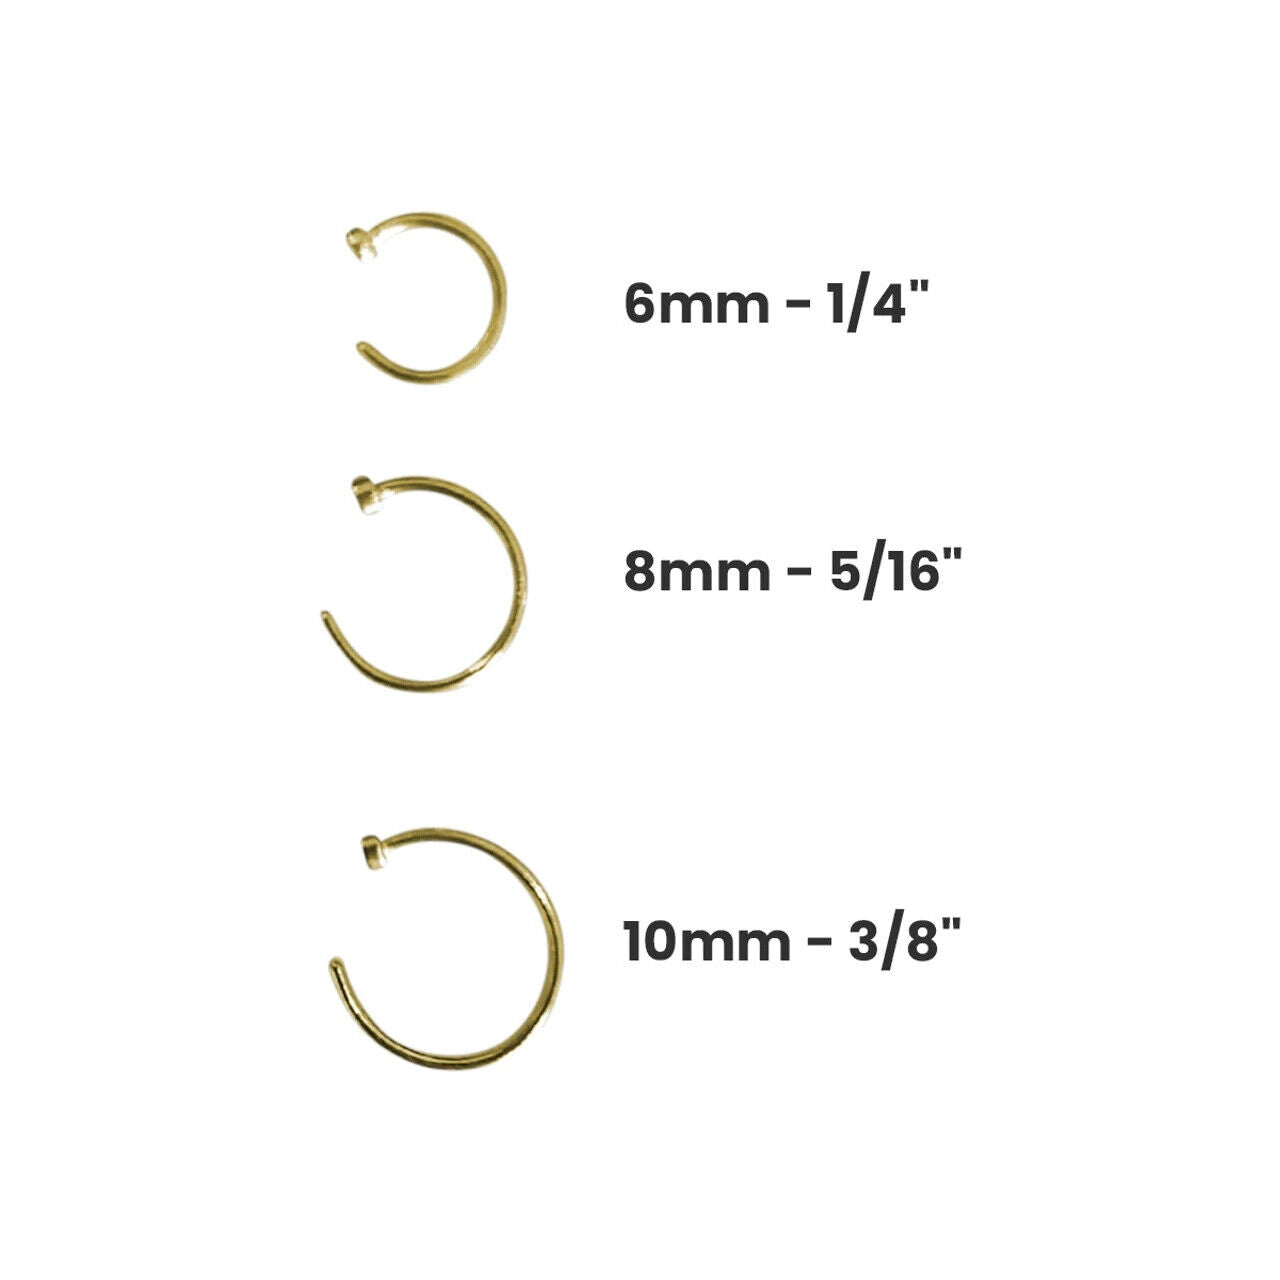 Nose Ear Ring Hoop 3 Pack Black Rose Gold Ion Plated 18G or 20G 6mm 8mm 10mm